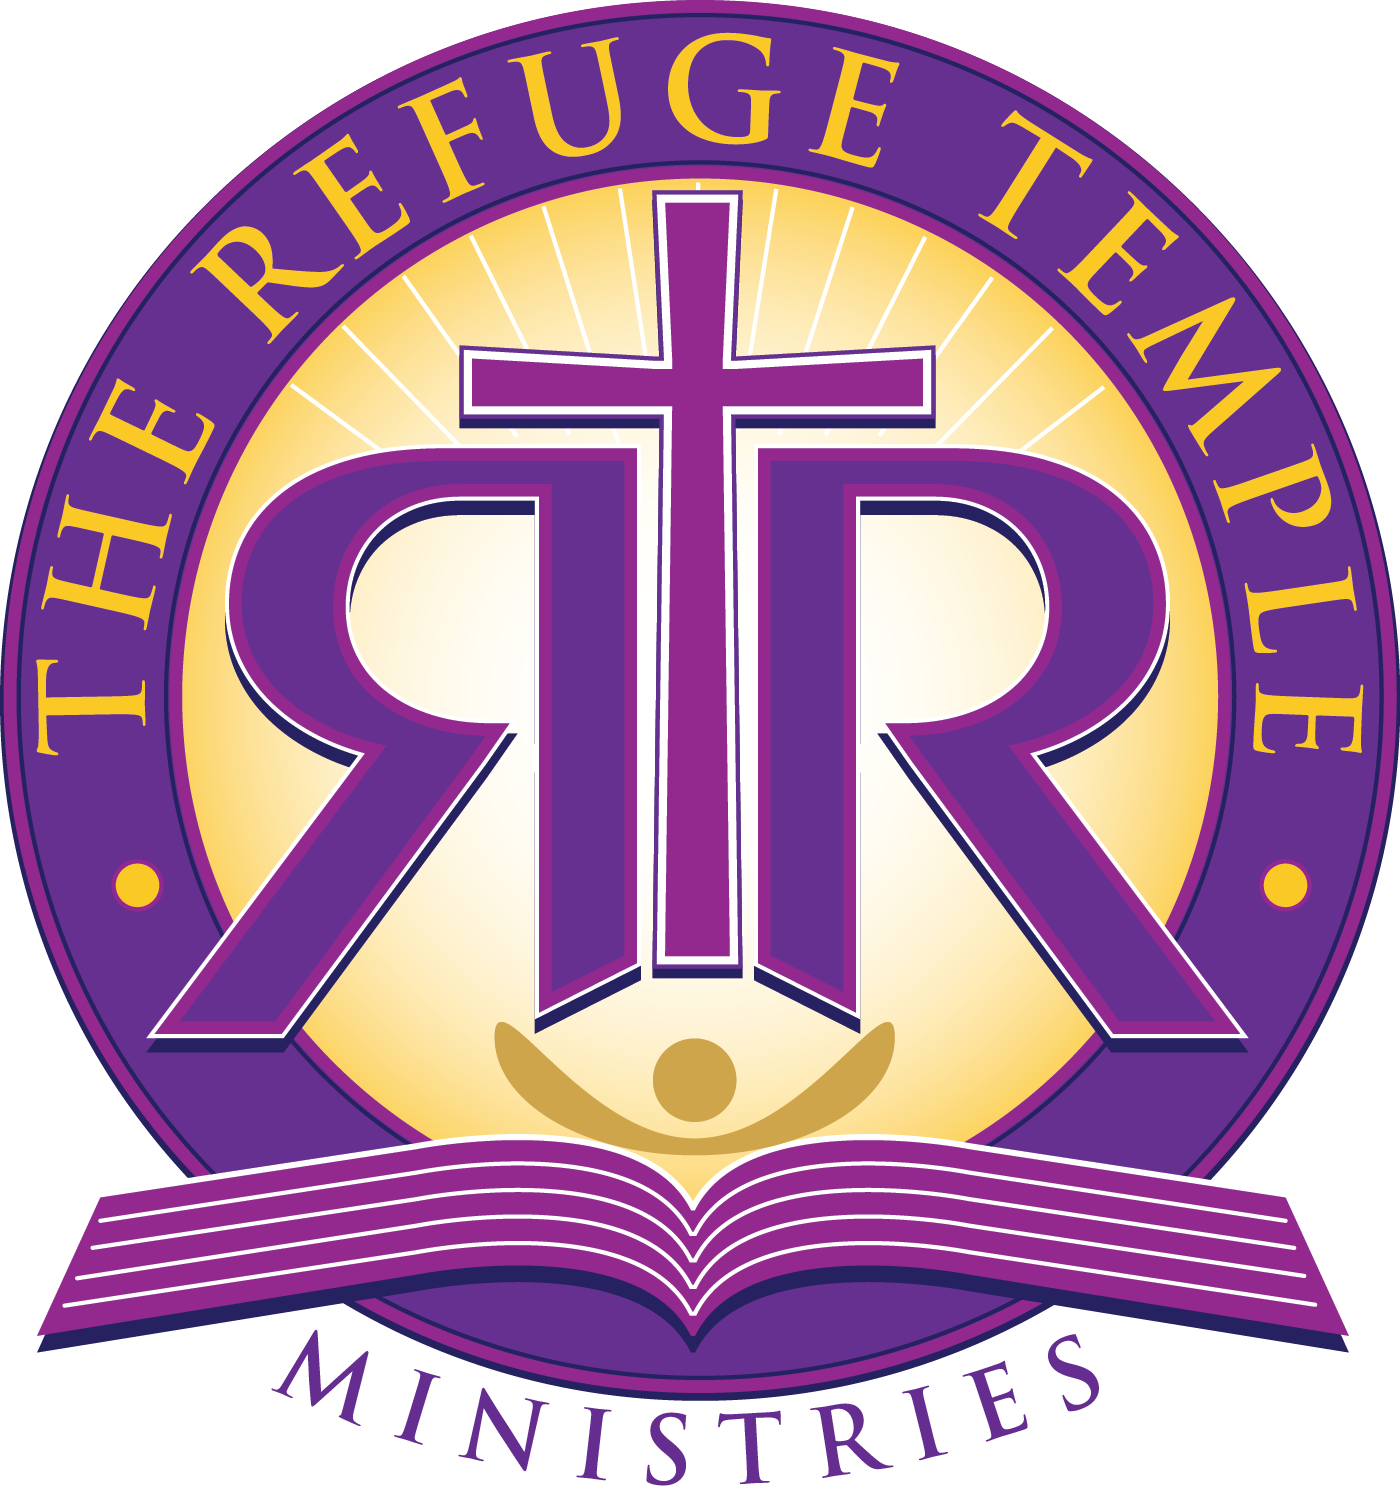 The Refuge Temple